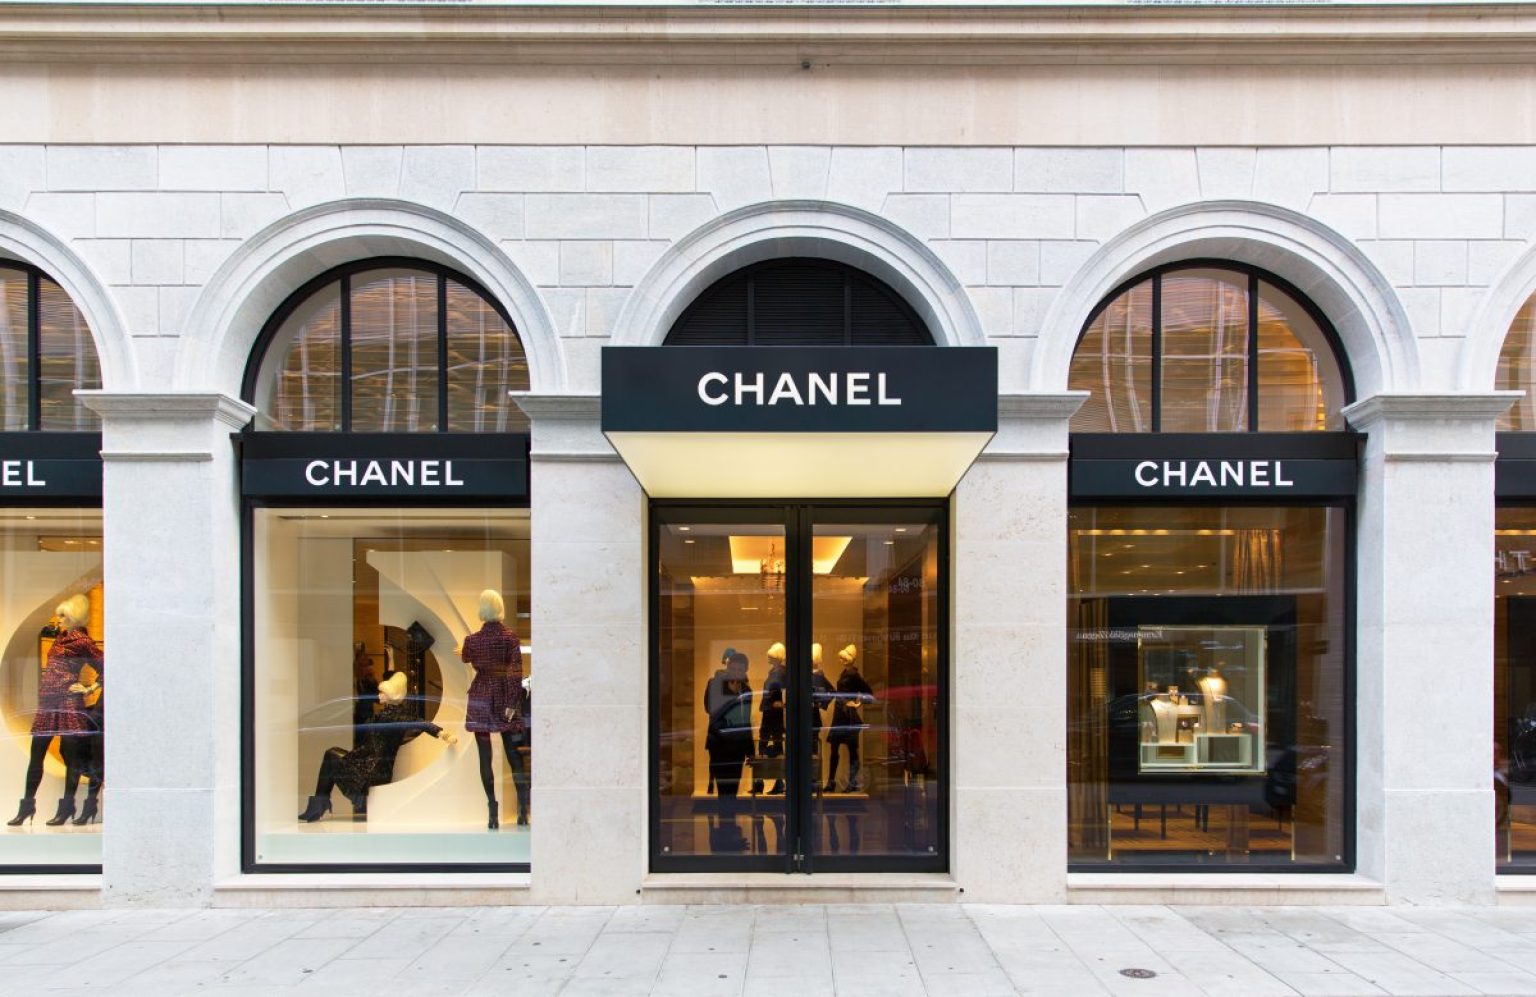 Chanel Shoe Size Chart All About Shoe Size Guide The Shoe Box NYC